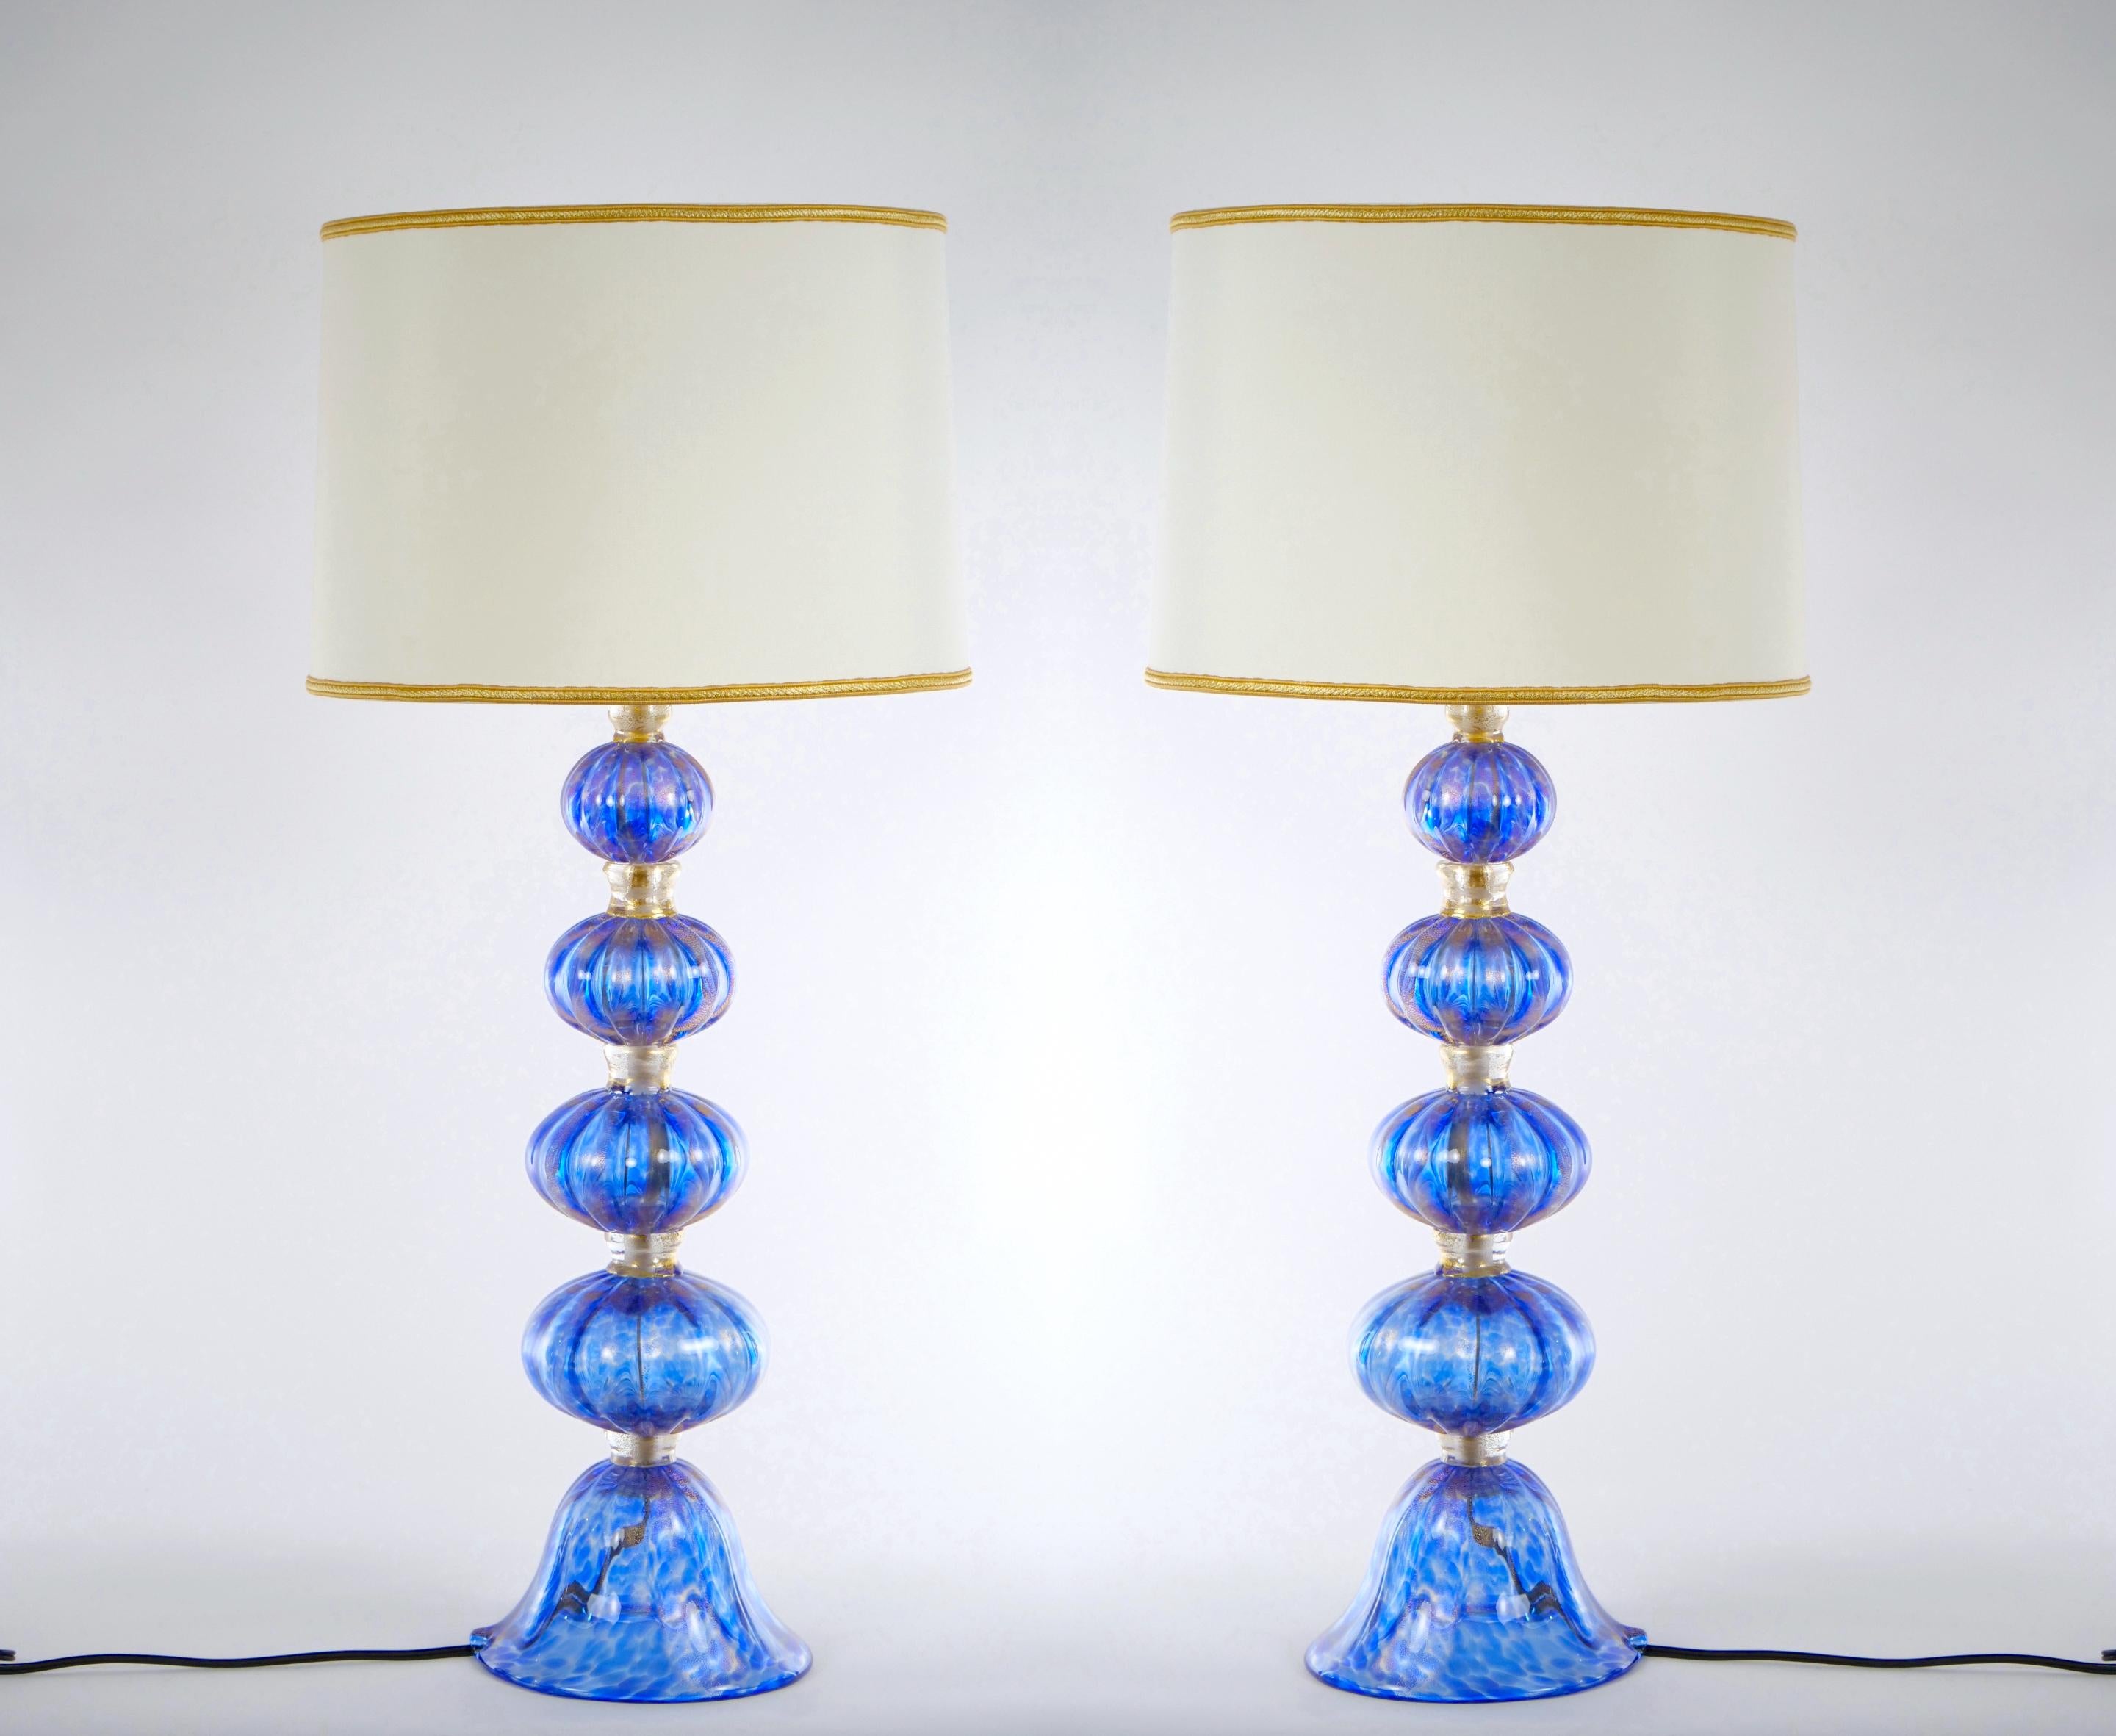 Late 20th century Murano, Venetian hand blown glass and decorated with gold flecks design details pair table lamps. Each lamp have four hand-blown pieces held together by avventurina glass rings, fused with 24-carat gold flecks resting on an open